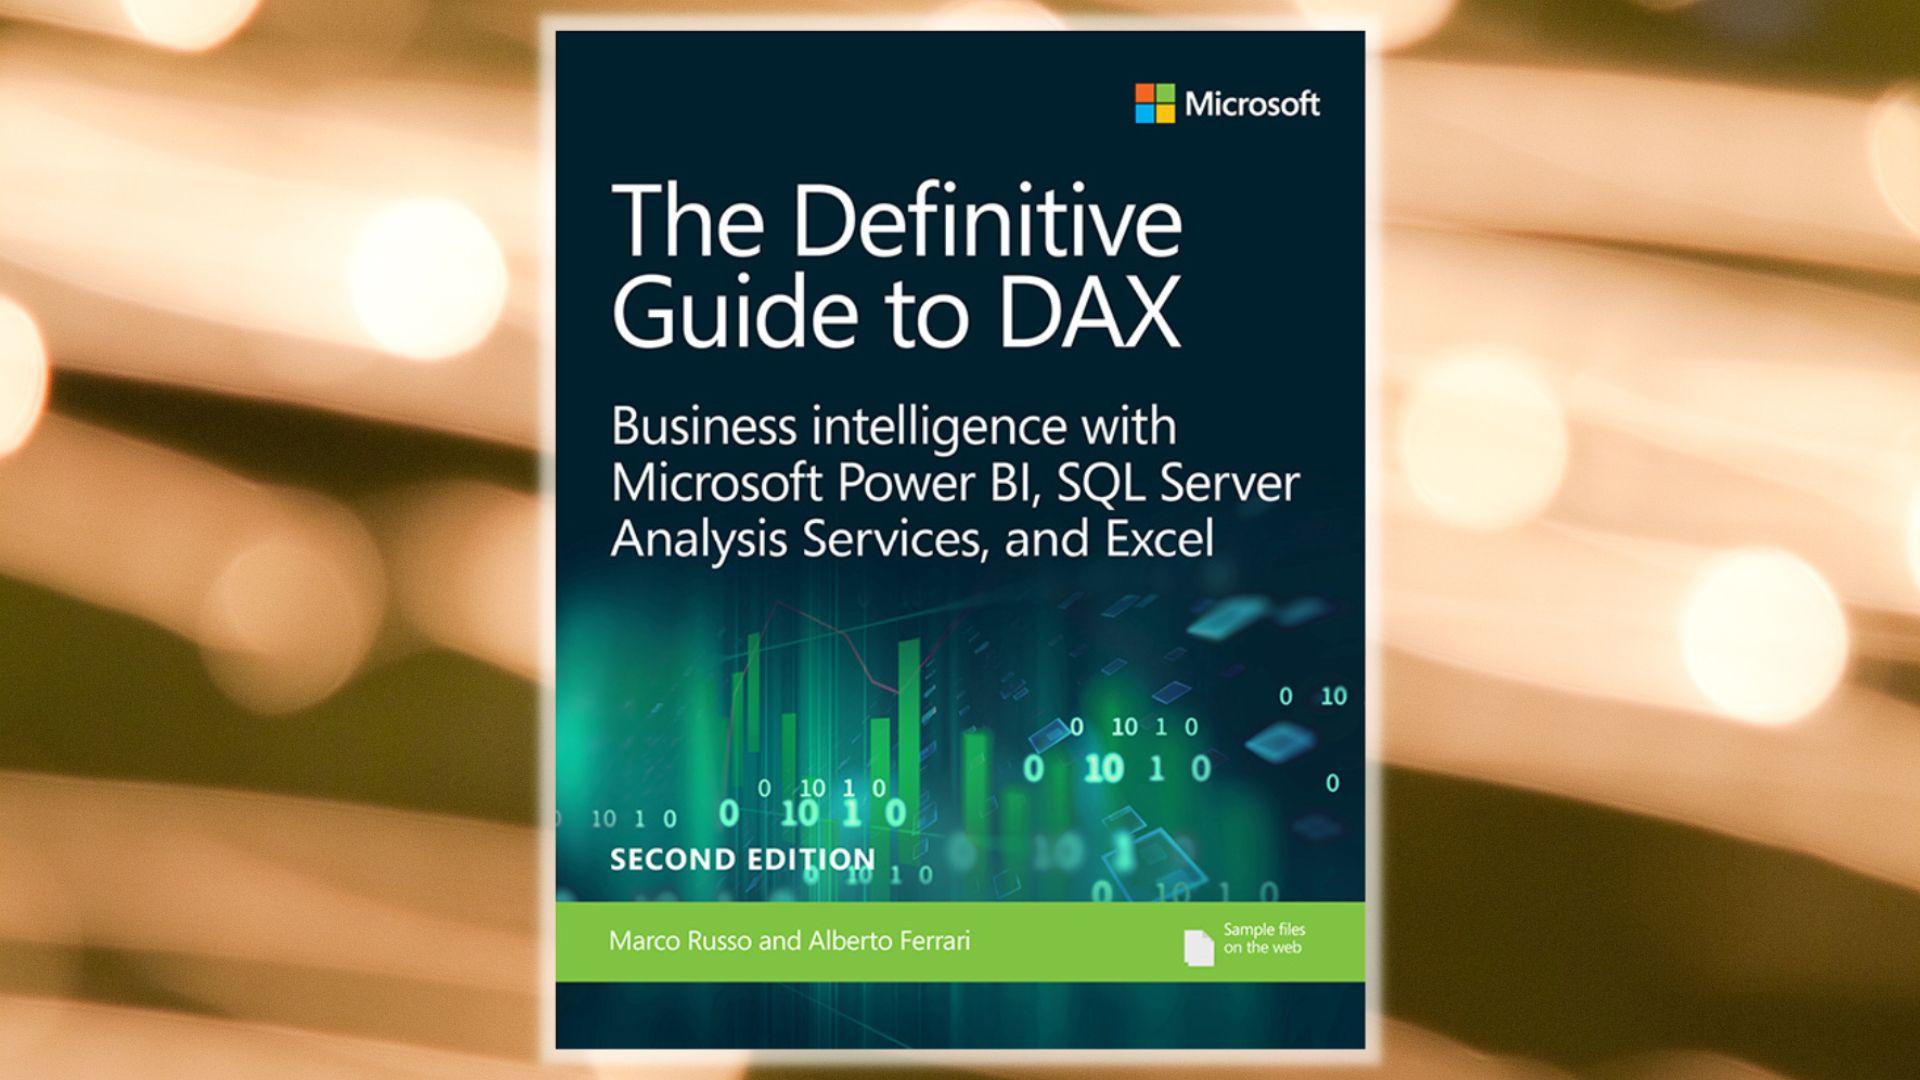 Book review - The Definitive Guide to DAX